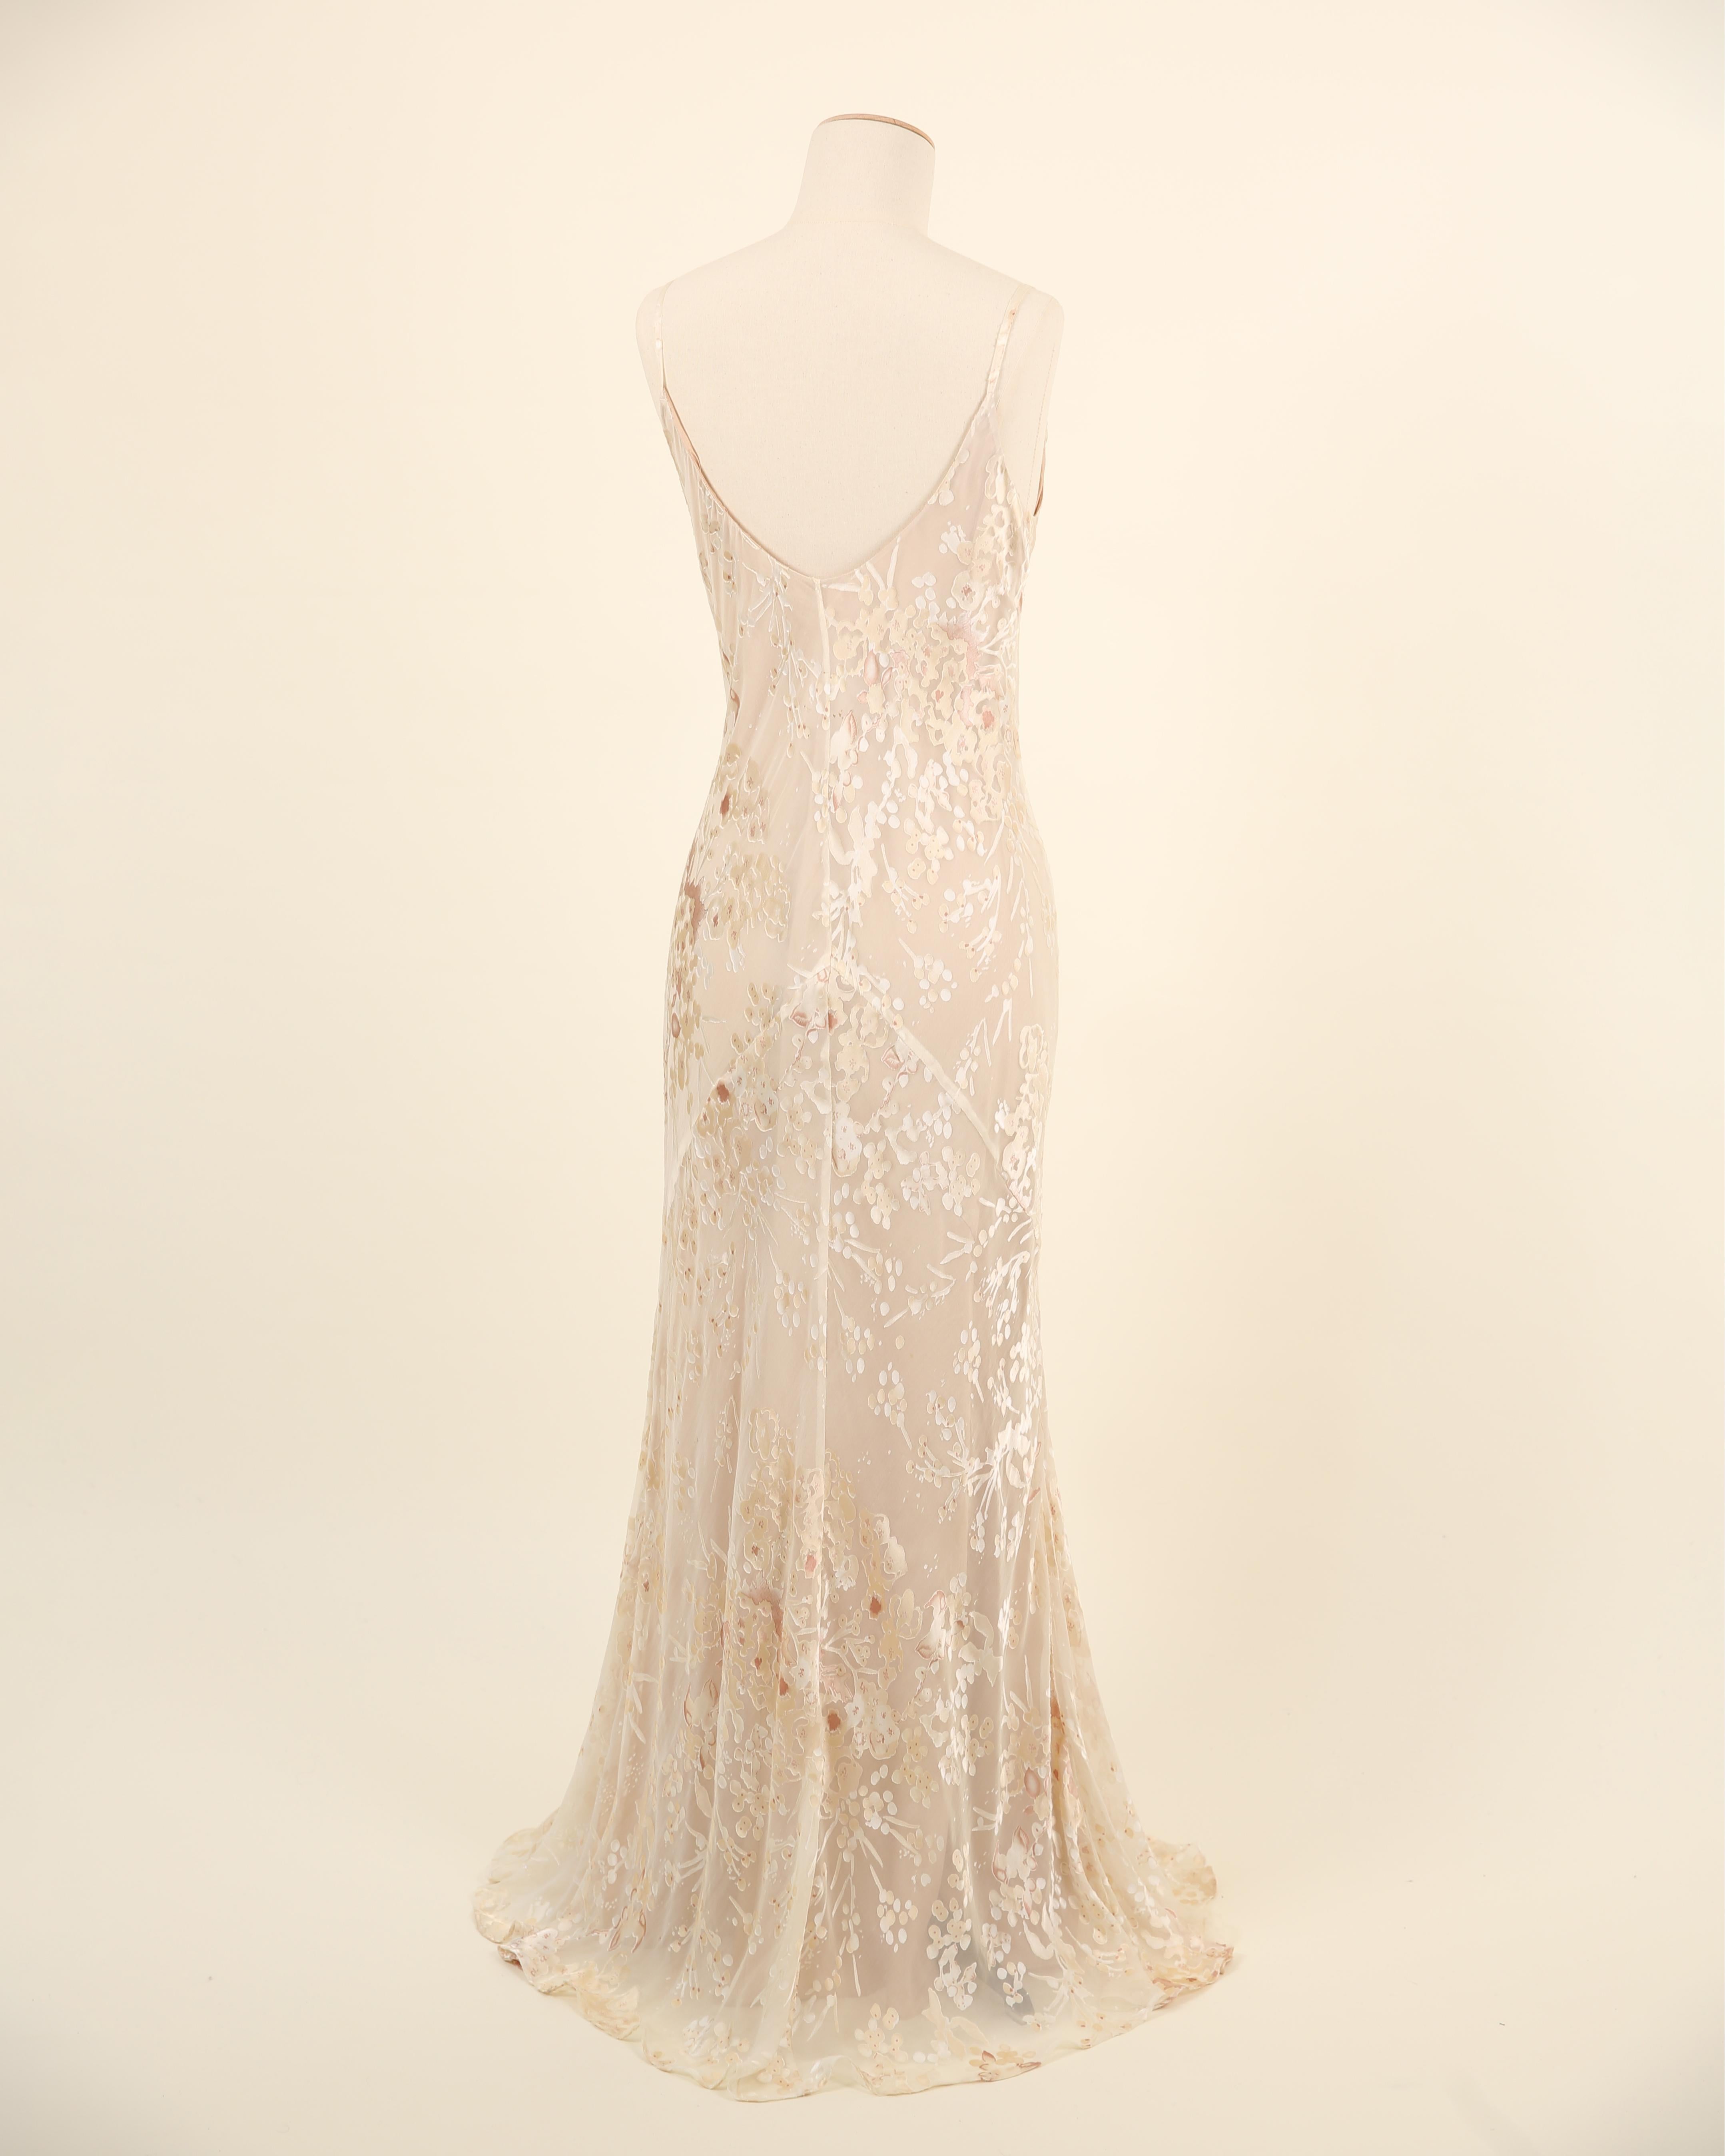 Vintage nude ivory beaded silk sheer floral layered wedding slip dress gown M L For Sale 3